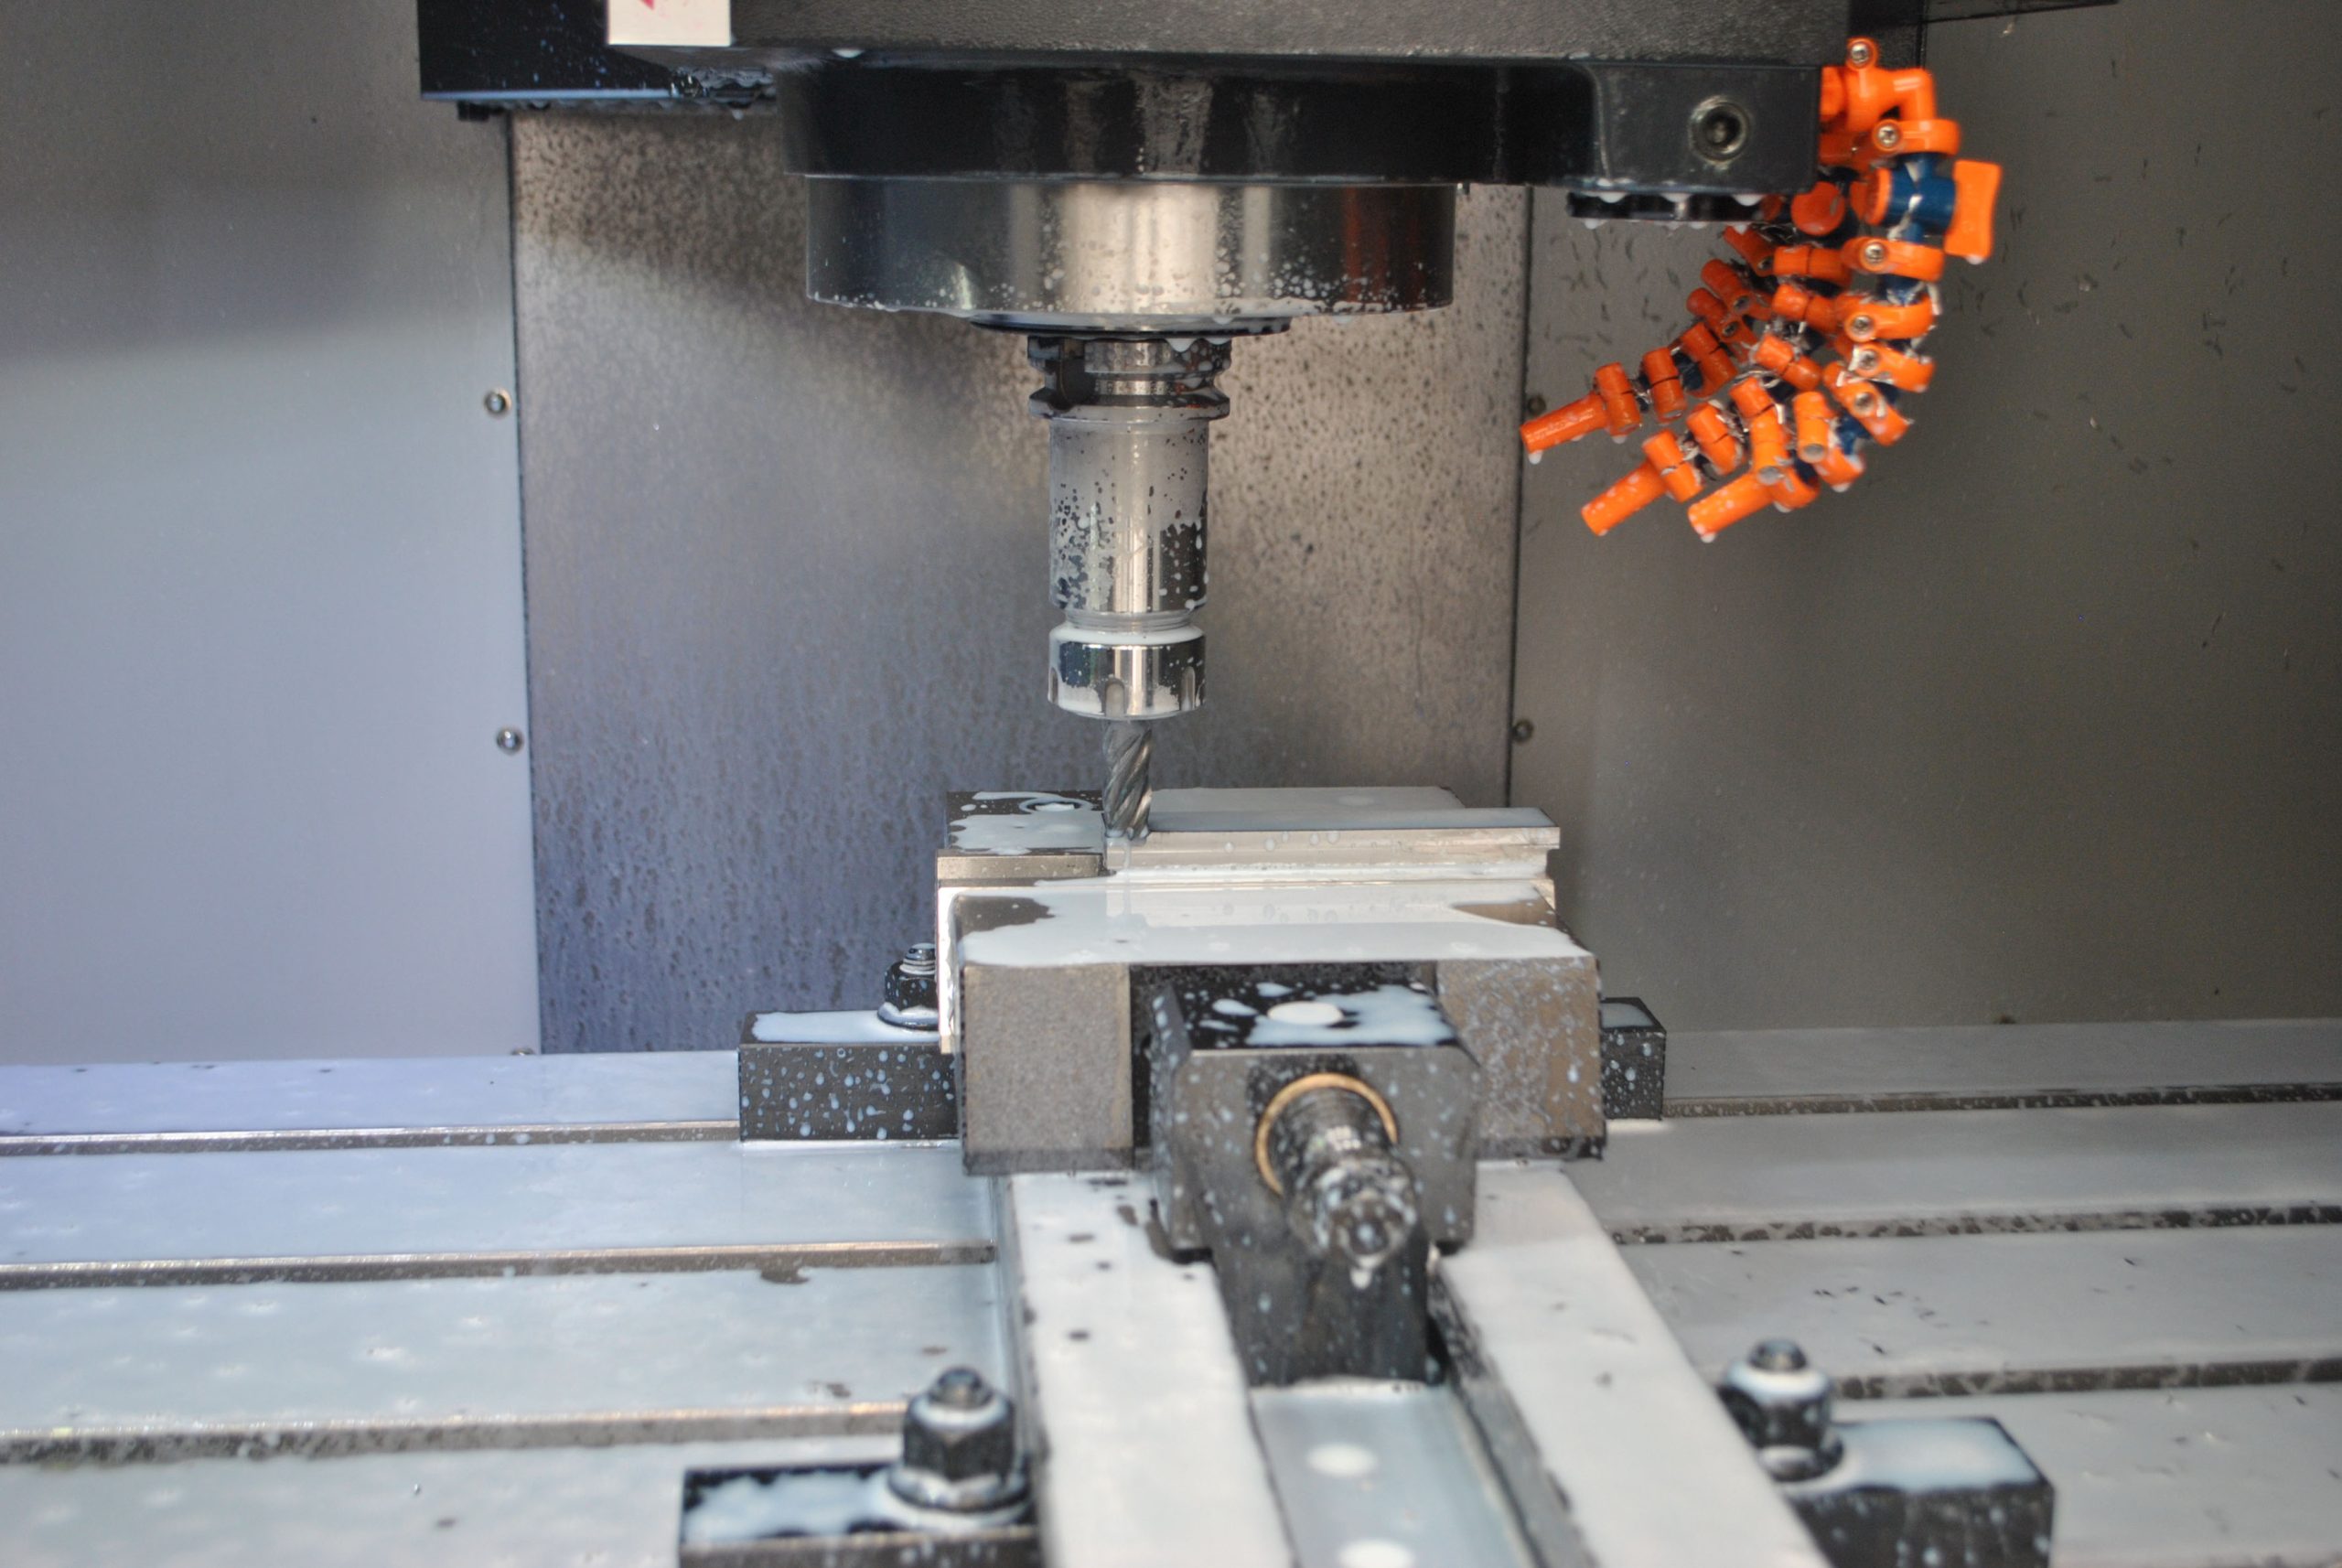 Interior of a DN Solutions DNM 5700 machining centre